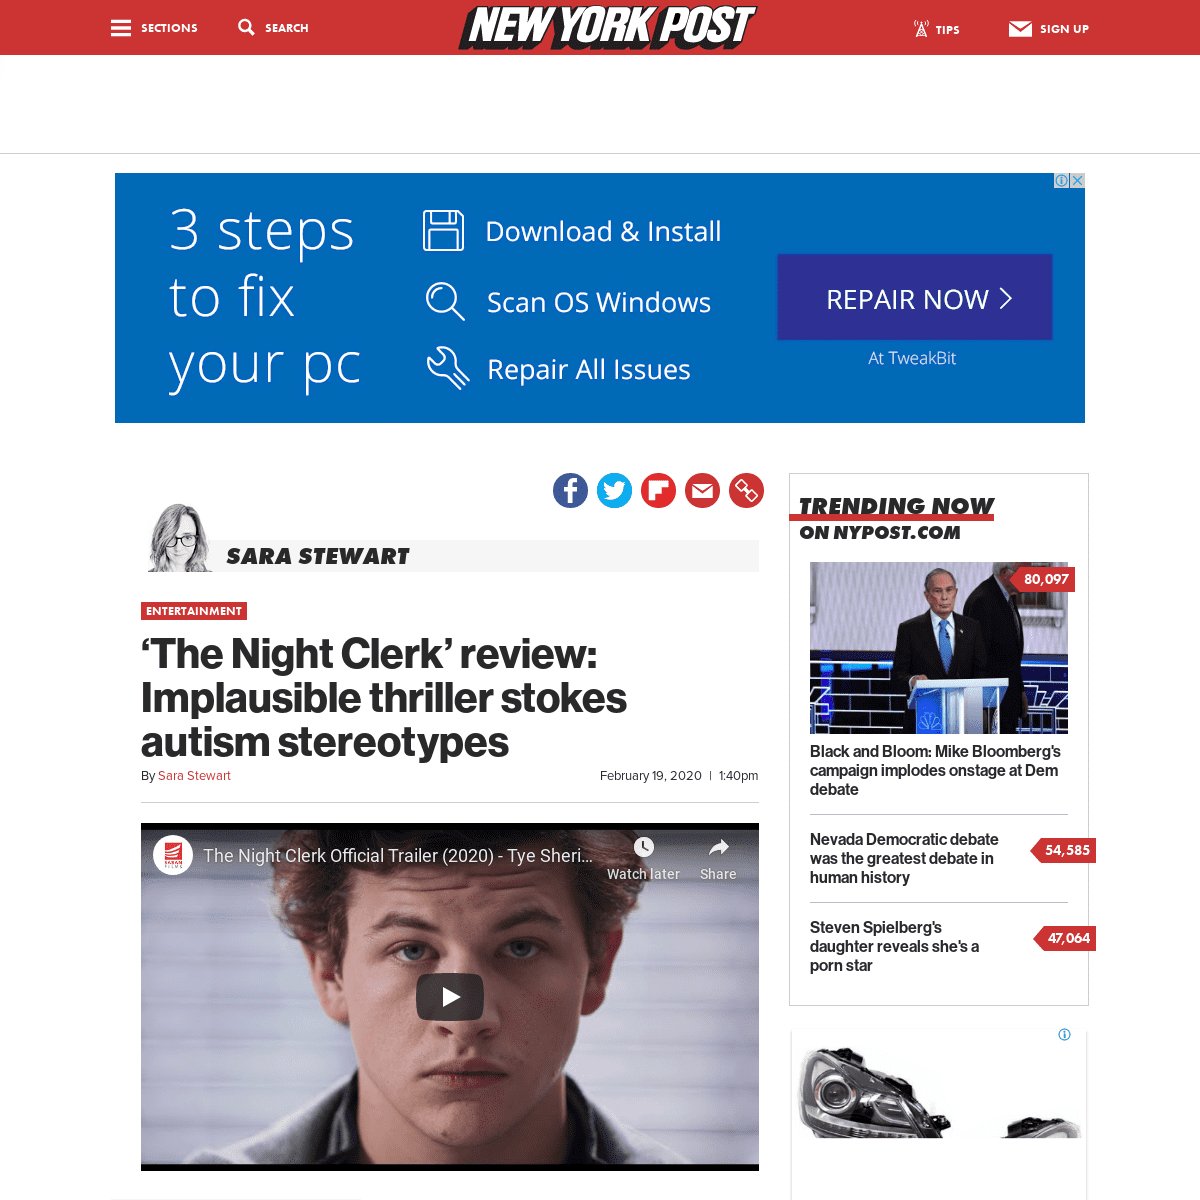 A complete backup of nypost.com/2020/02/19/the-night-clerk-review-implausible-thriller-stokes-autism-stereotypes/